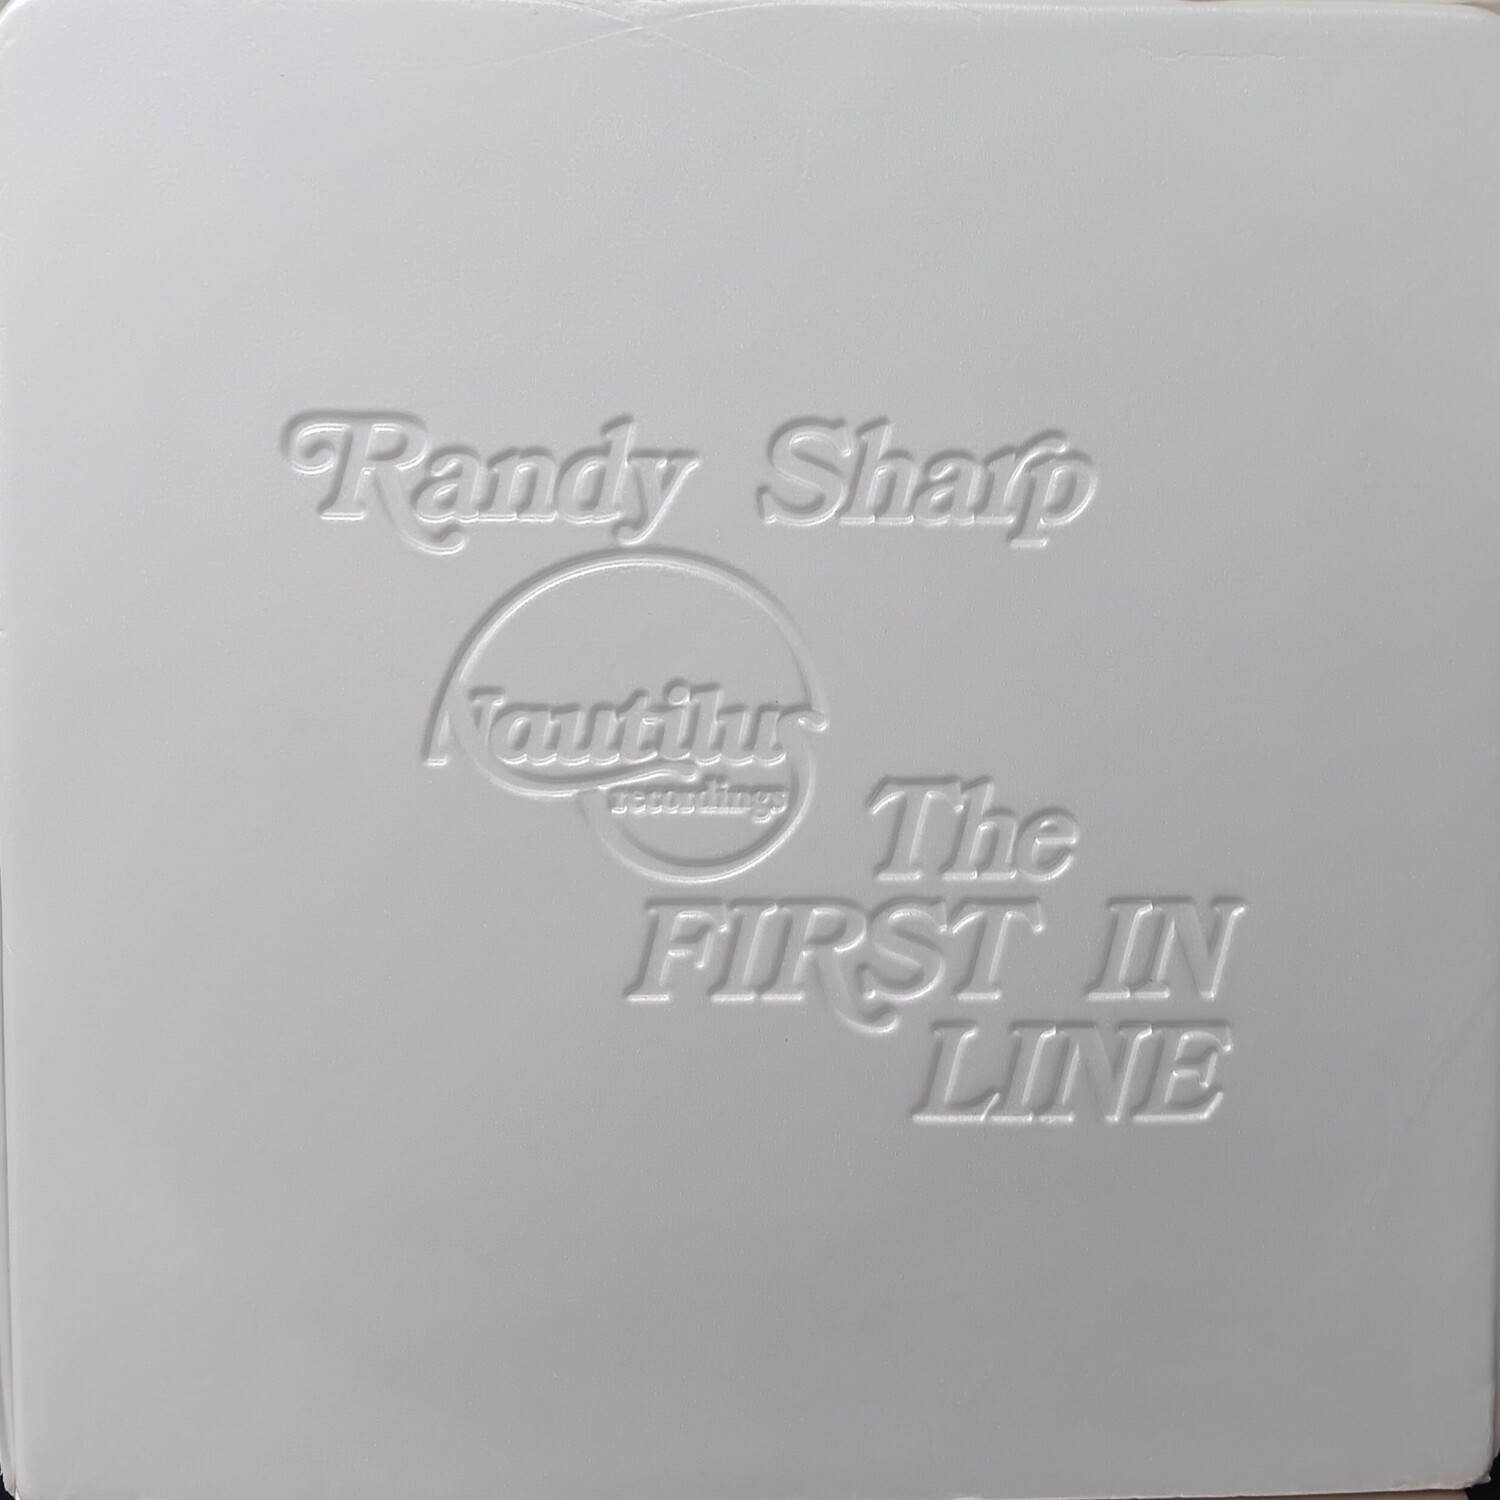 RANDY SHARP - The first in line